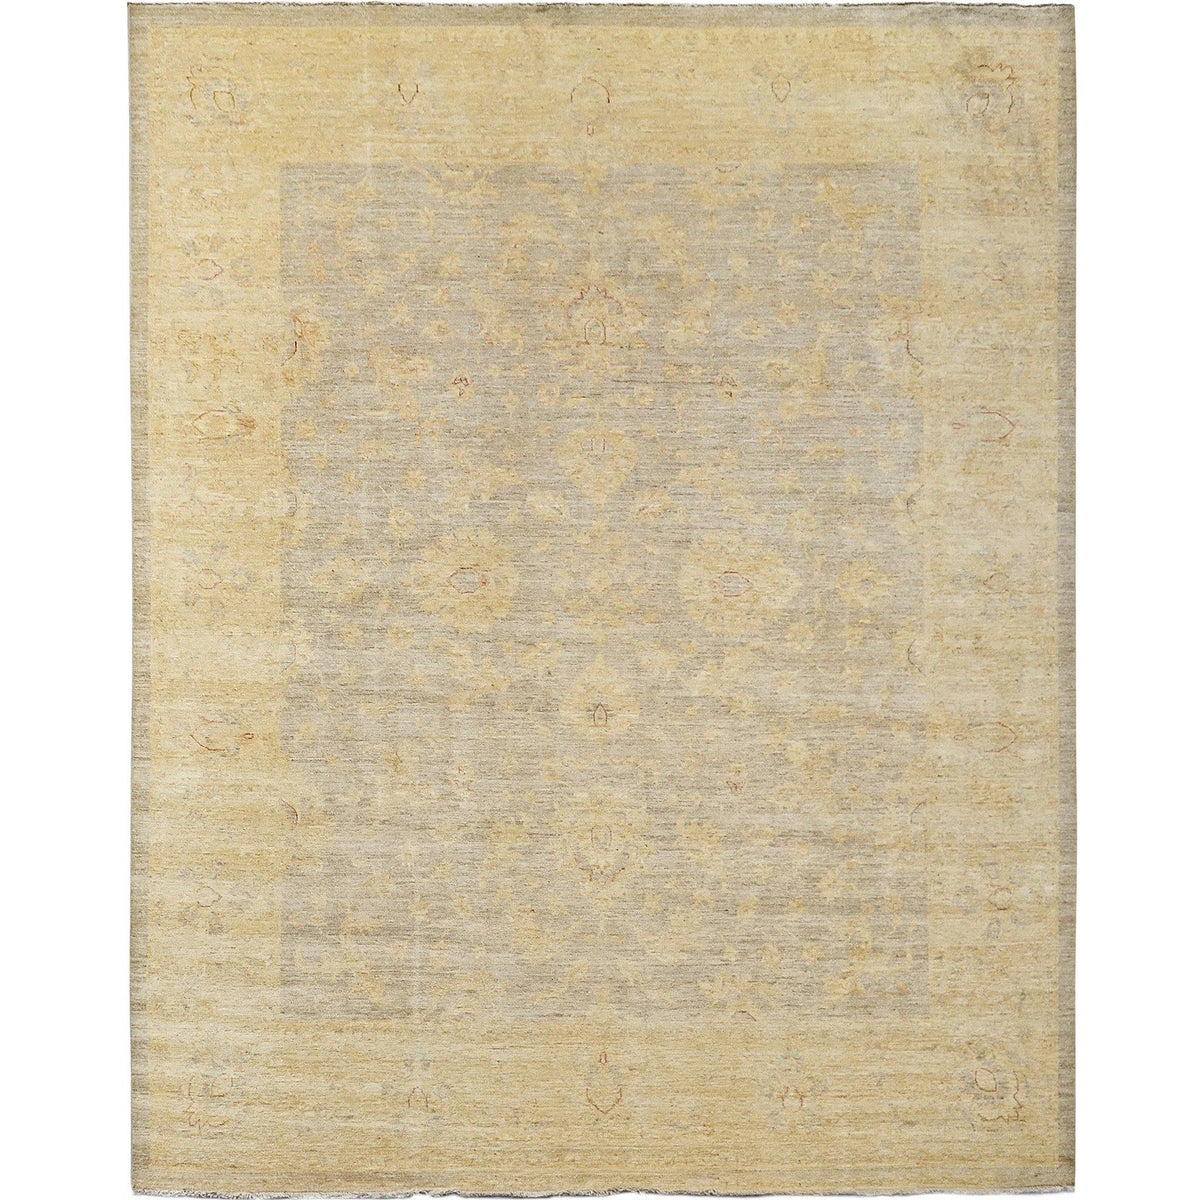 Fine Hand-knotted Colour Reform Wool Rug 247cm x 305cm